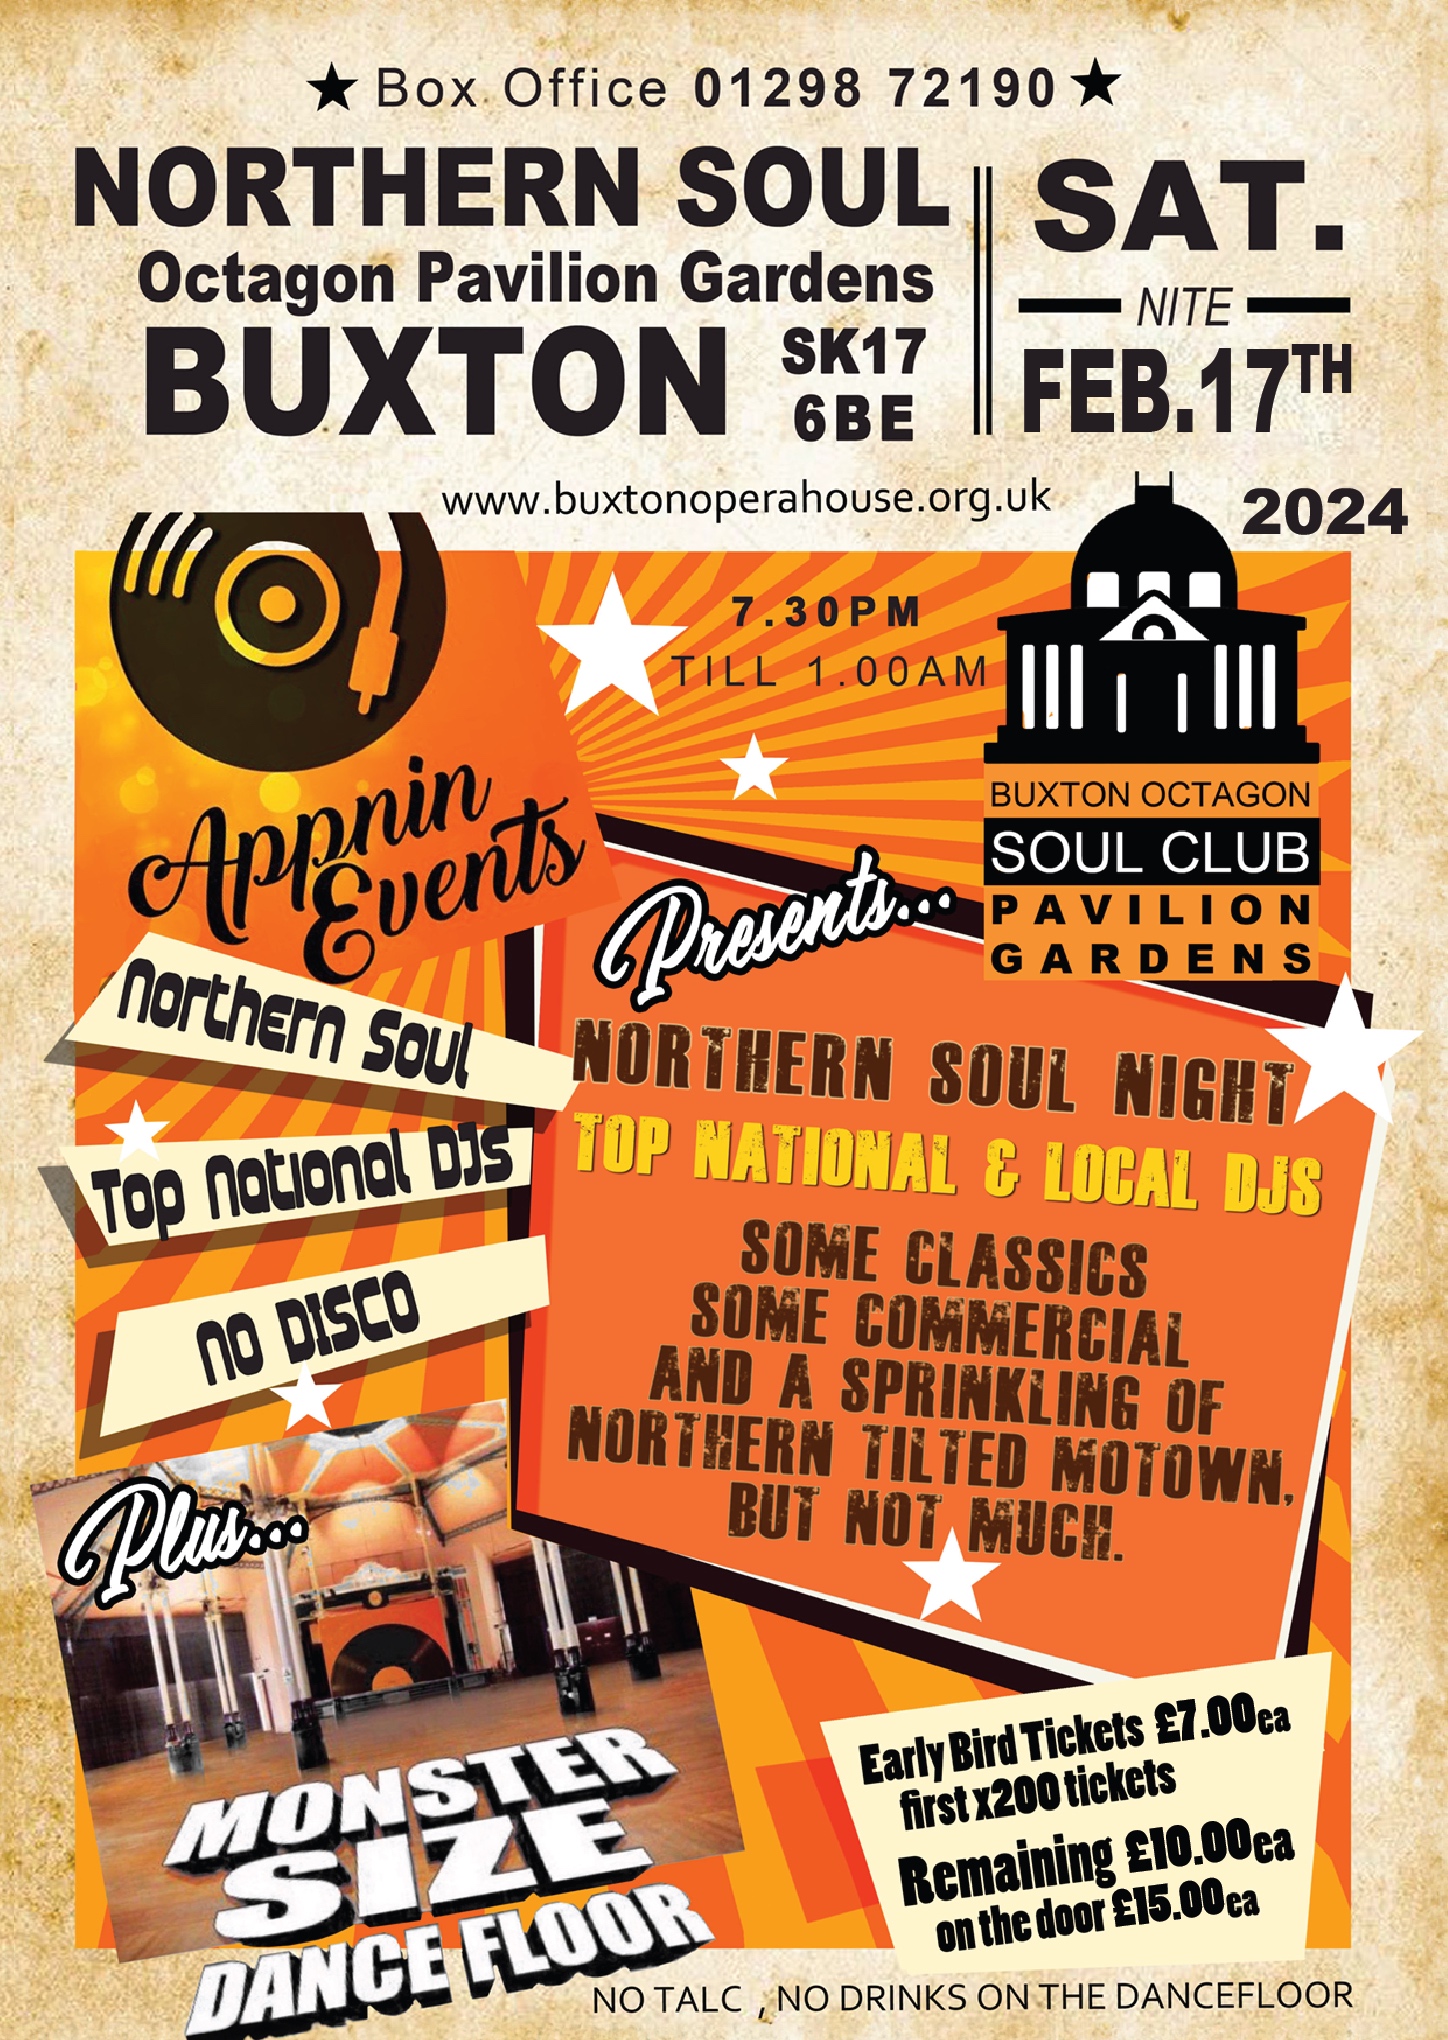 Buxton Octagon Northern Soul Club present a night of Northern Soul on February 17th 2024